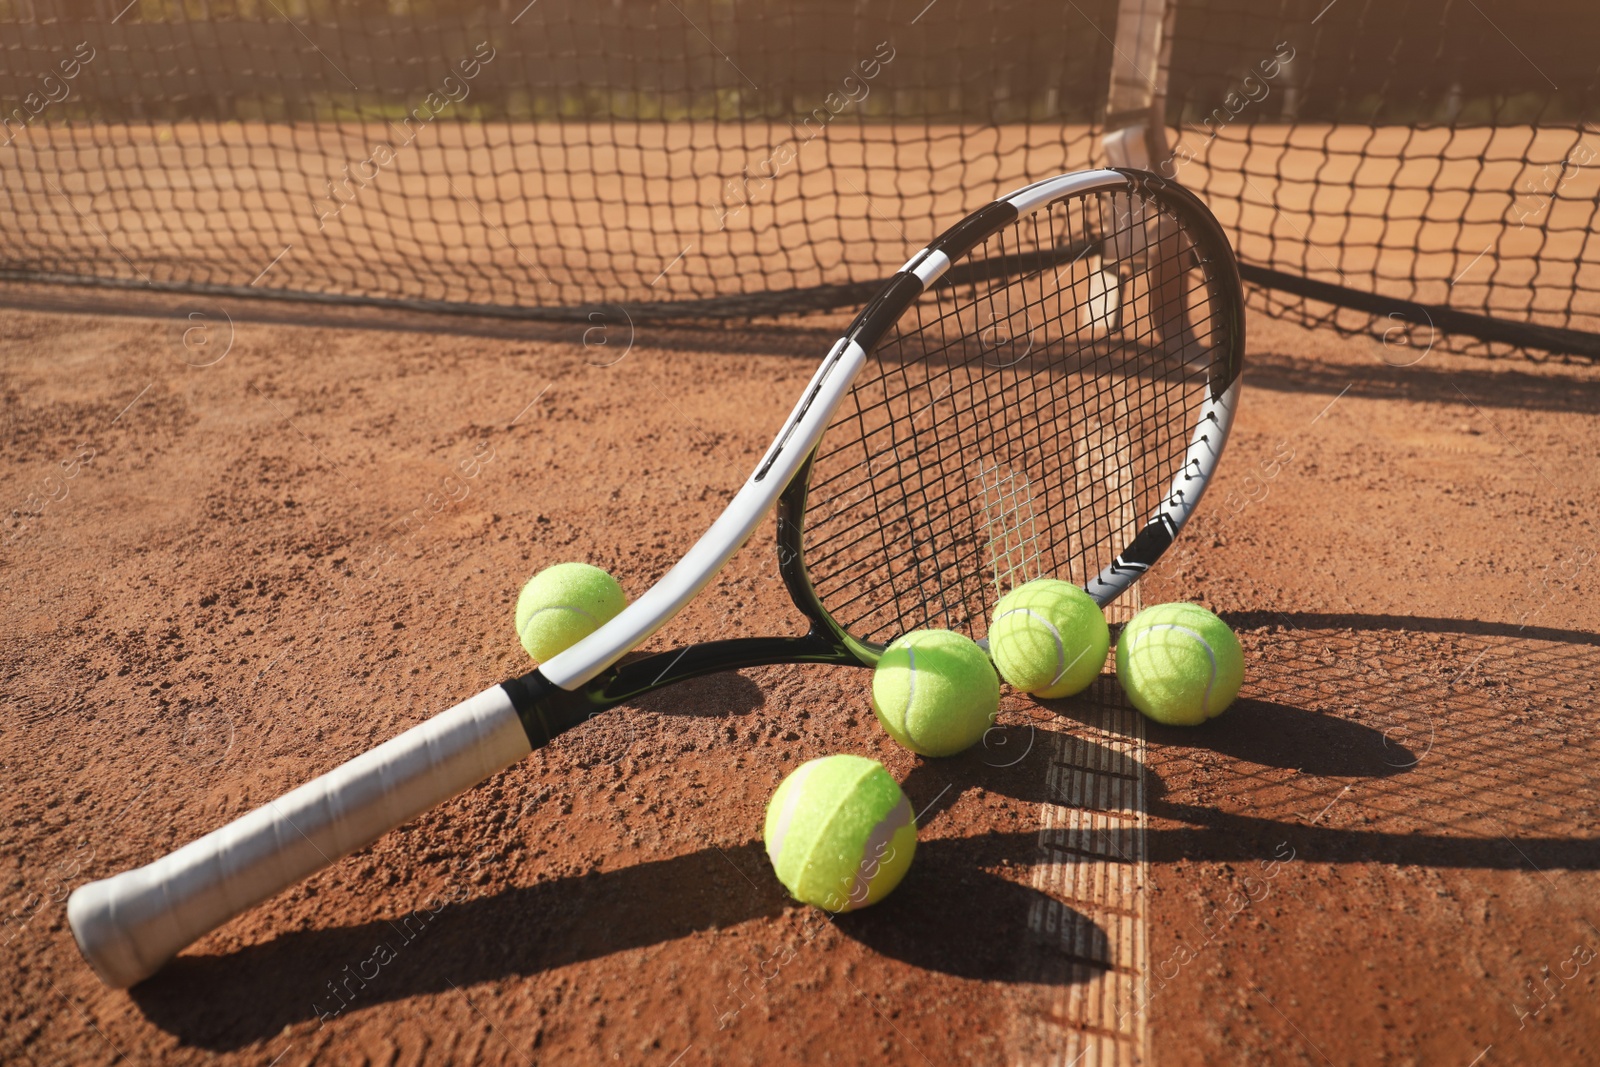 Photo of Tennis balls and racket on clay court